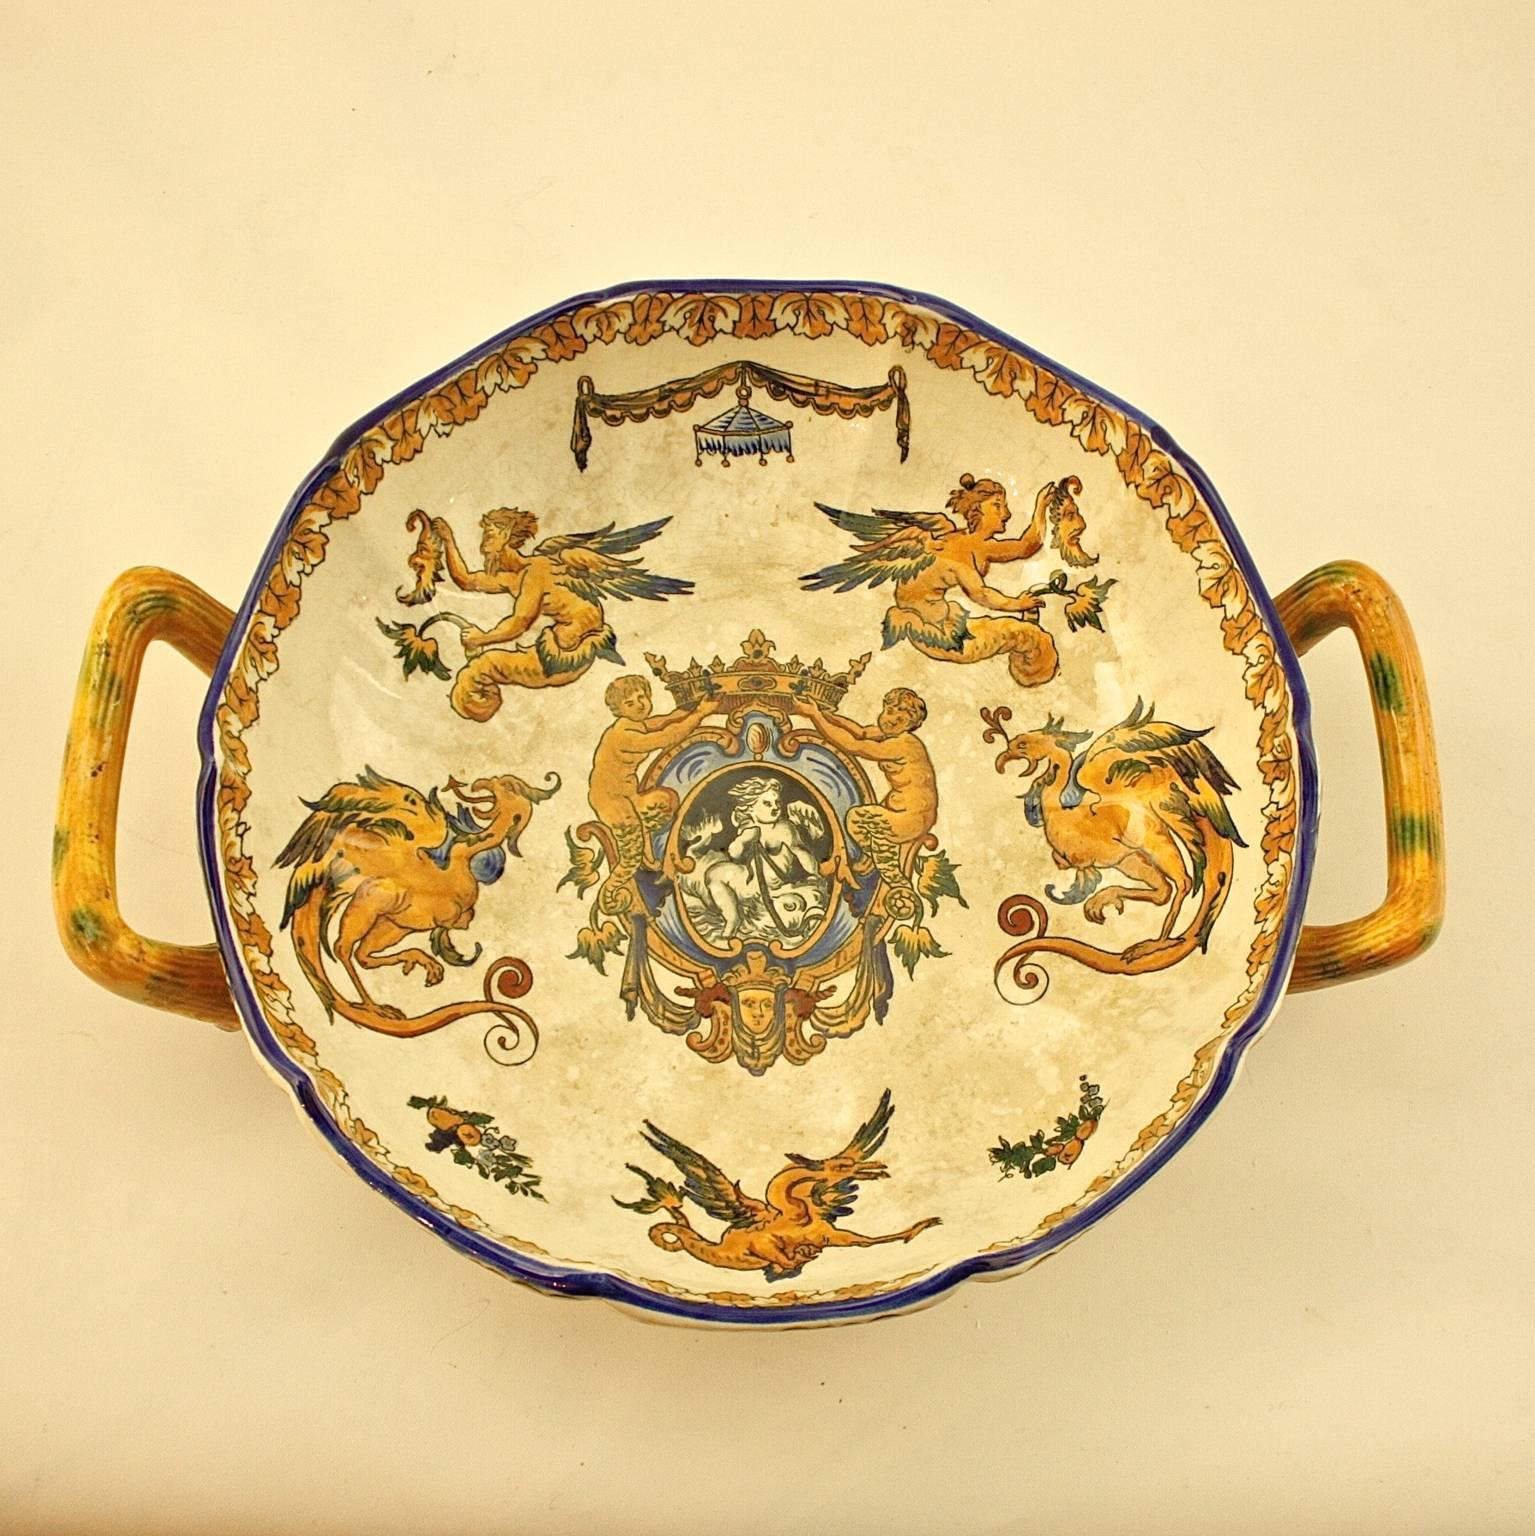 A lead-glazed yellow earthenware two-handled bowl of the Faiencerie de Gien. Gien was founded in 1821 by Thomas Hall, and Englishman who wanted to introduce fine English earthenware manufacturing techniques in France. Gien specialized in traditional